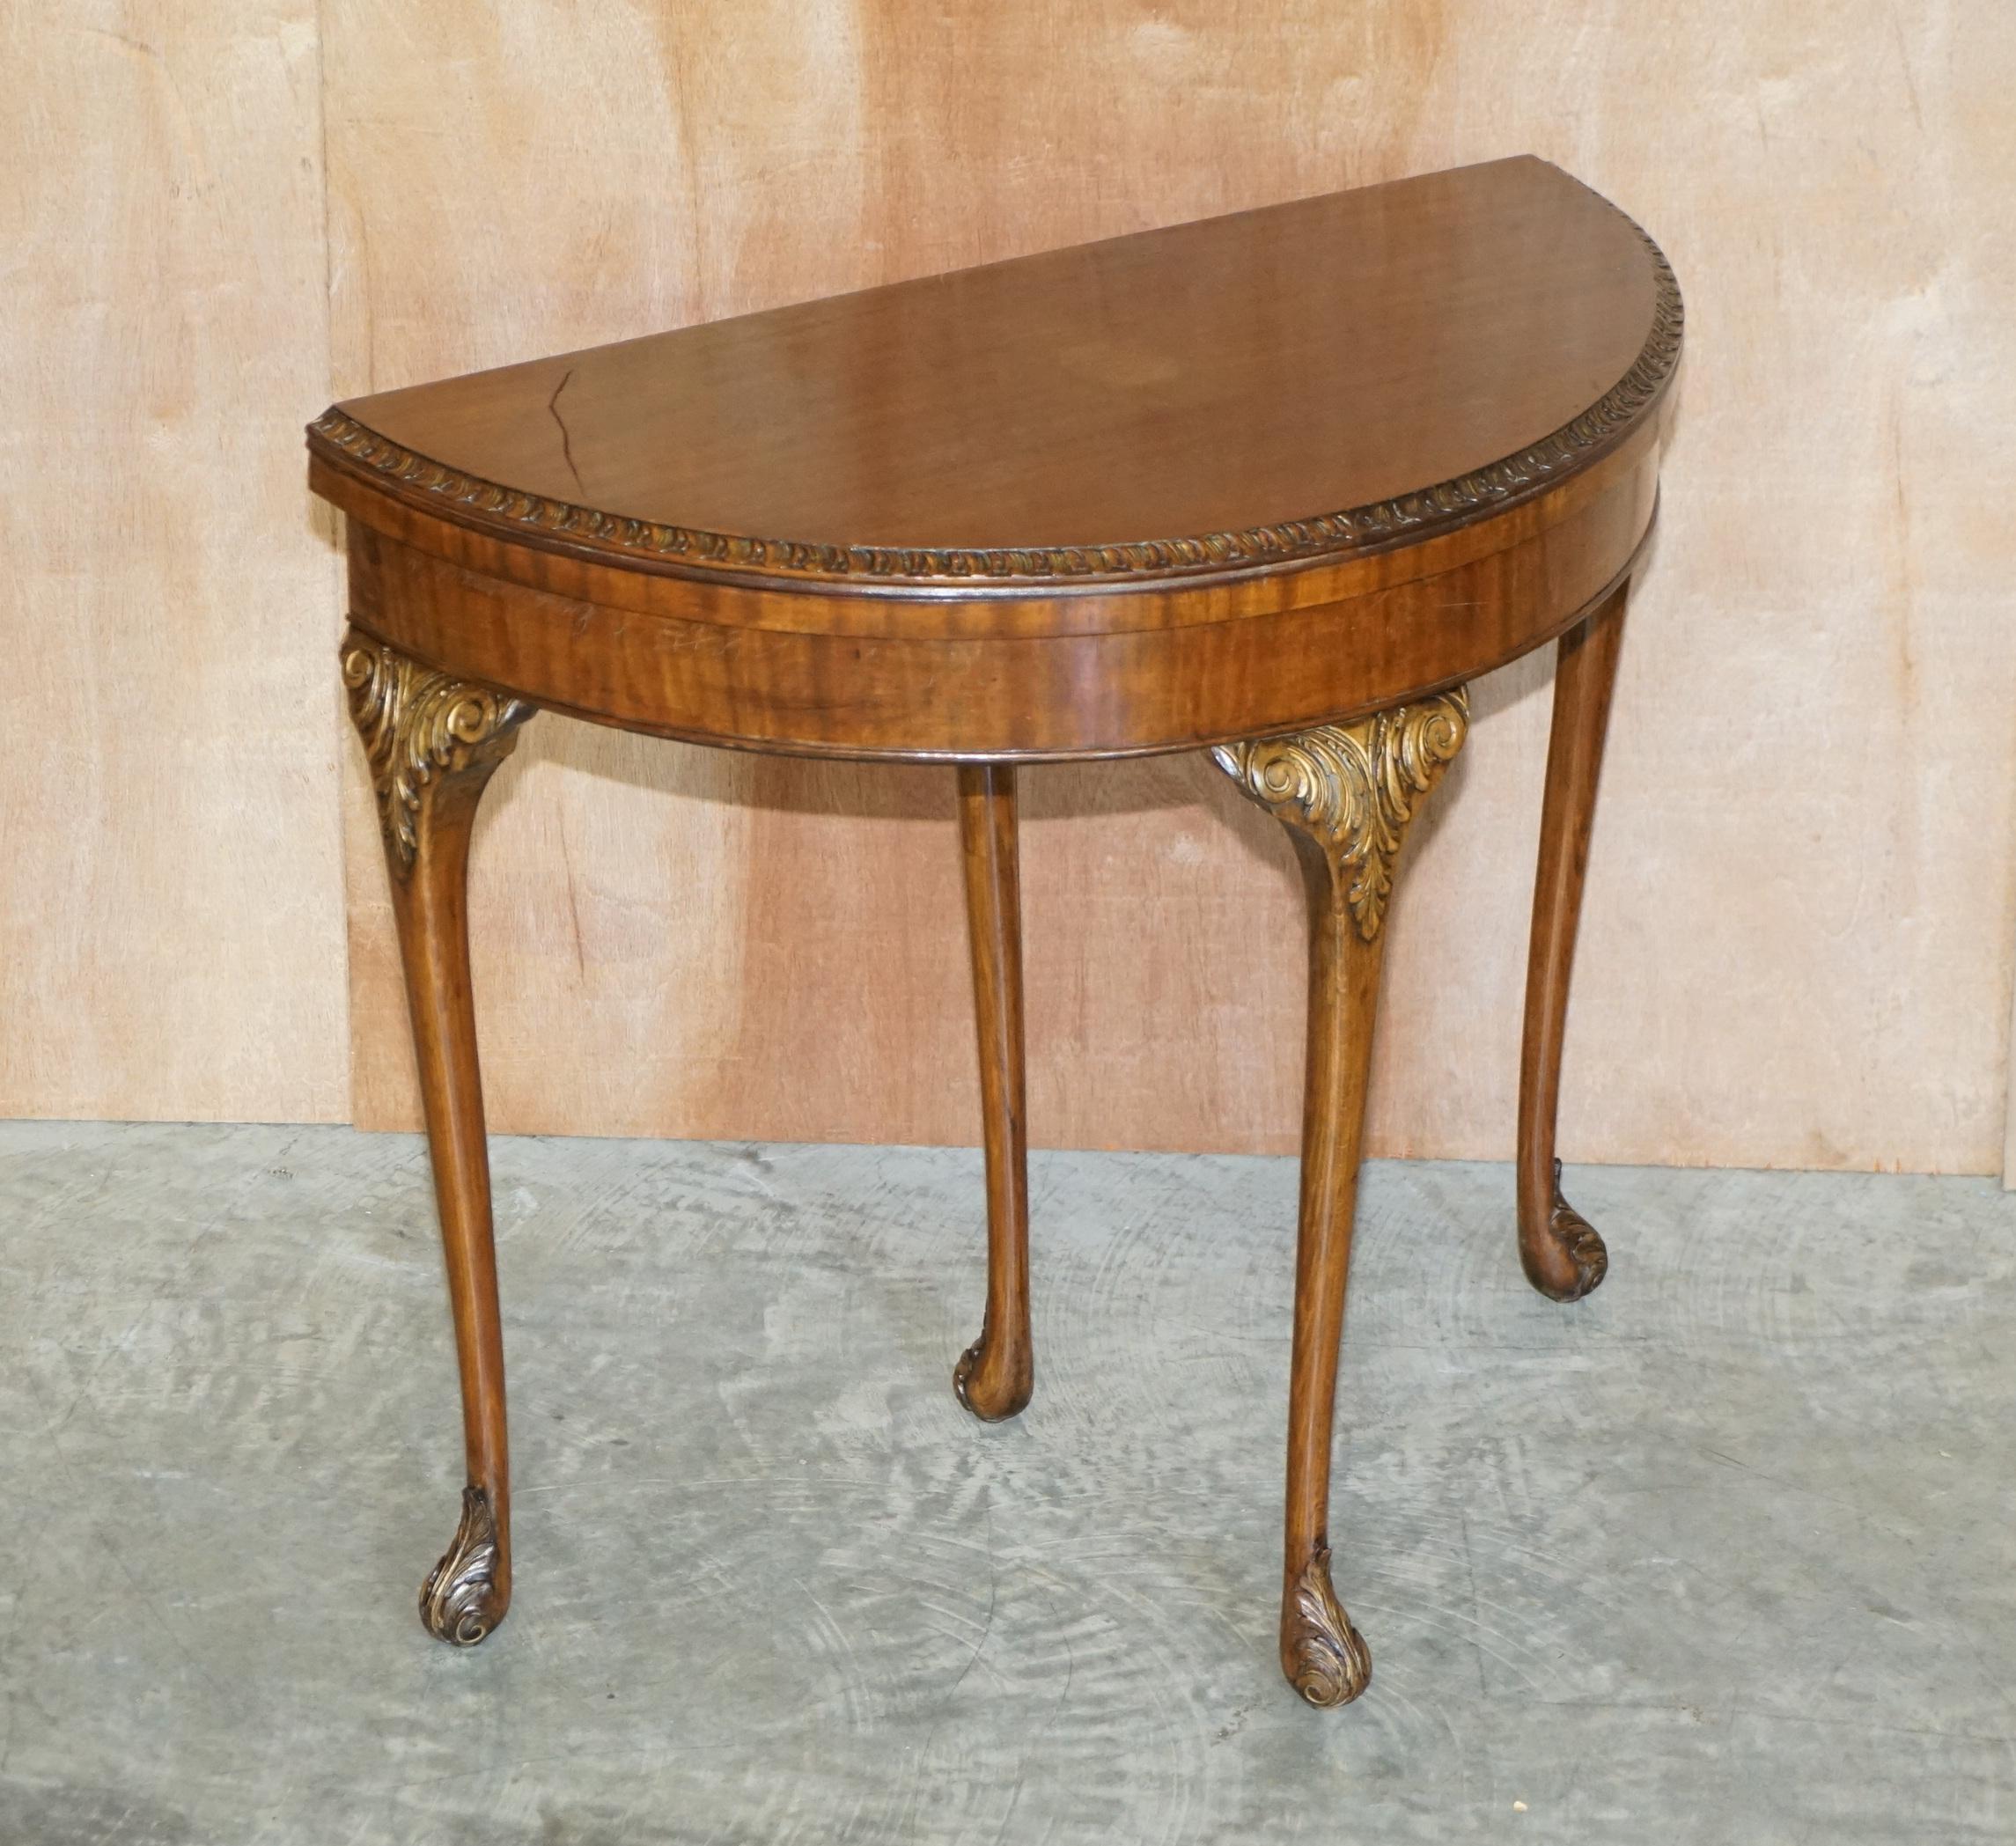 We are delighted to offer for sale this lovely circa 1880-1900 flamed mahogany demi lune games card table with ornately carved legs

A very good looking and well made piece, made in the Regency style however it is late Victorian. The legs are